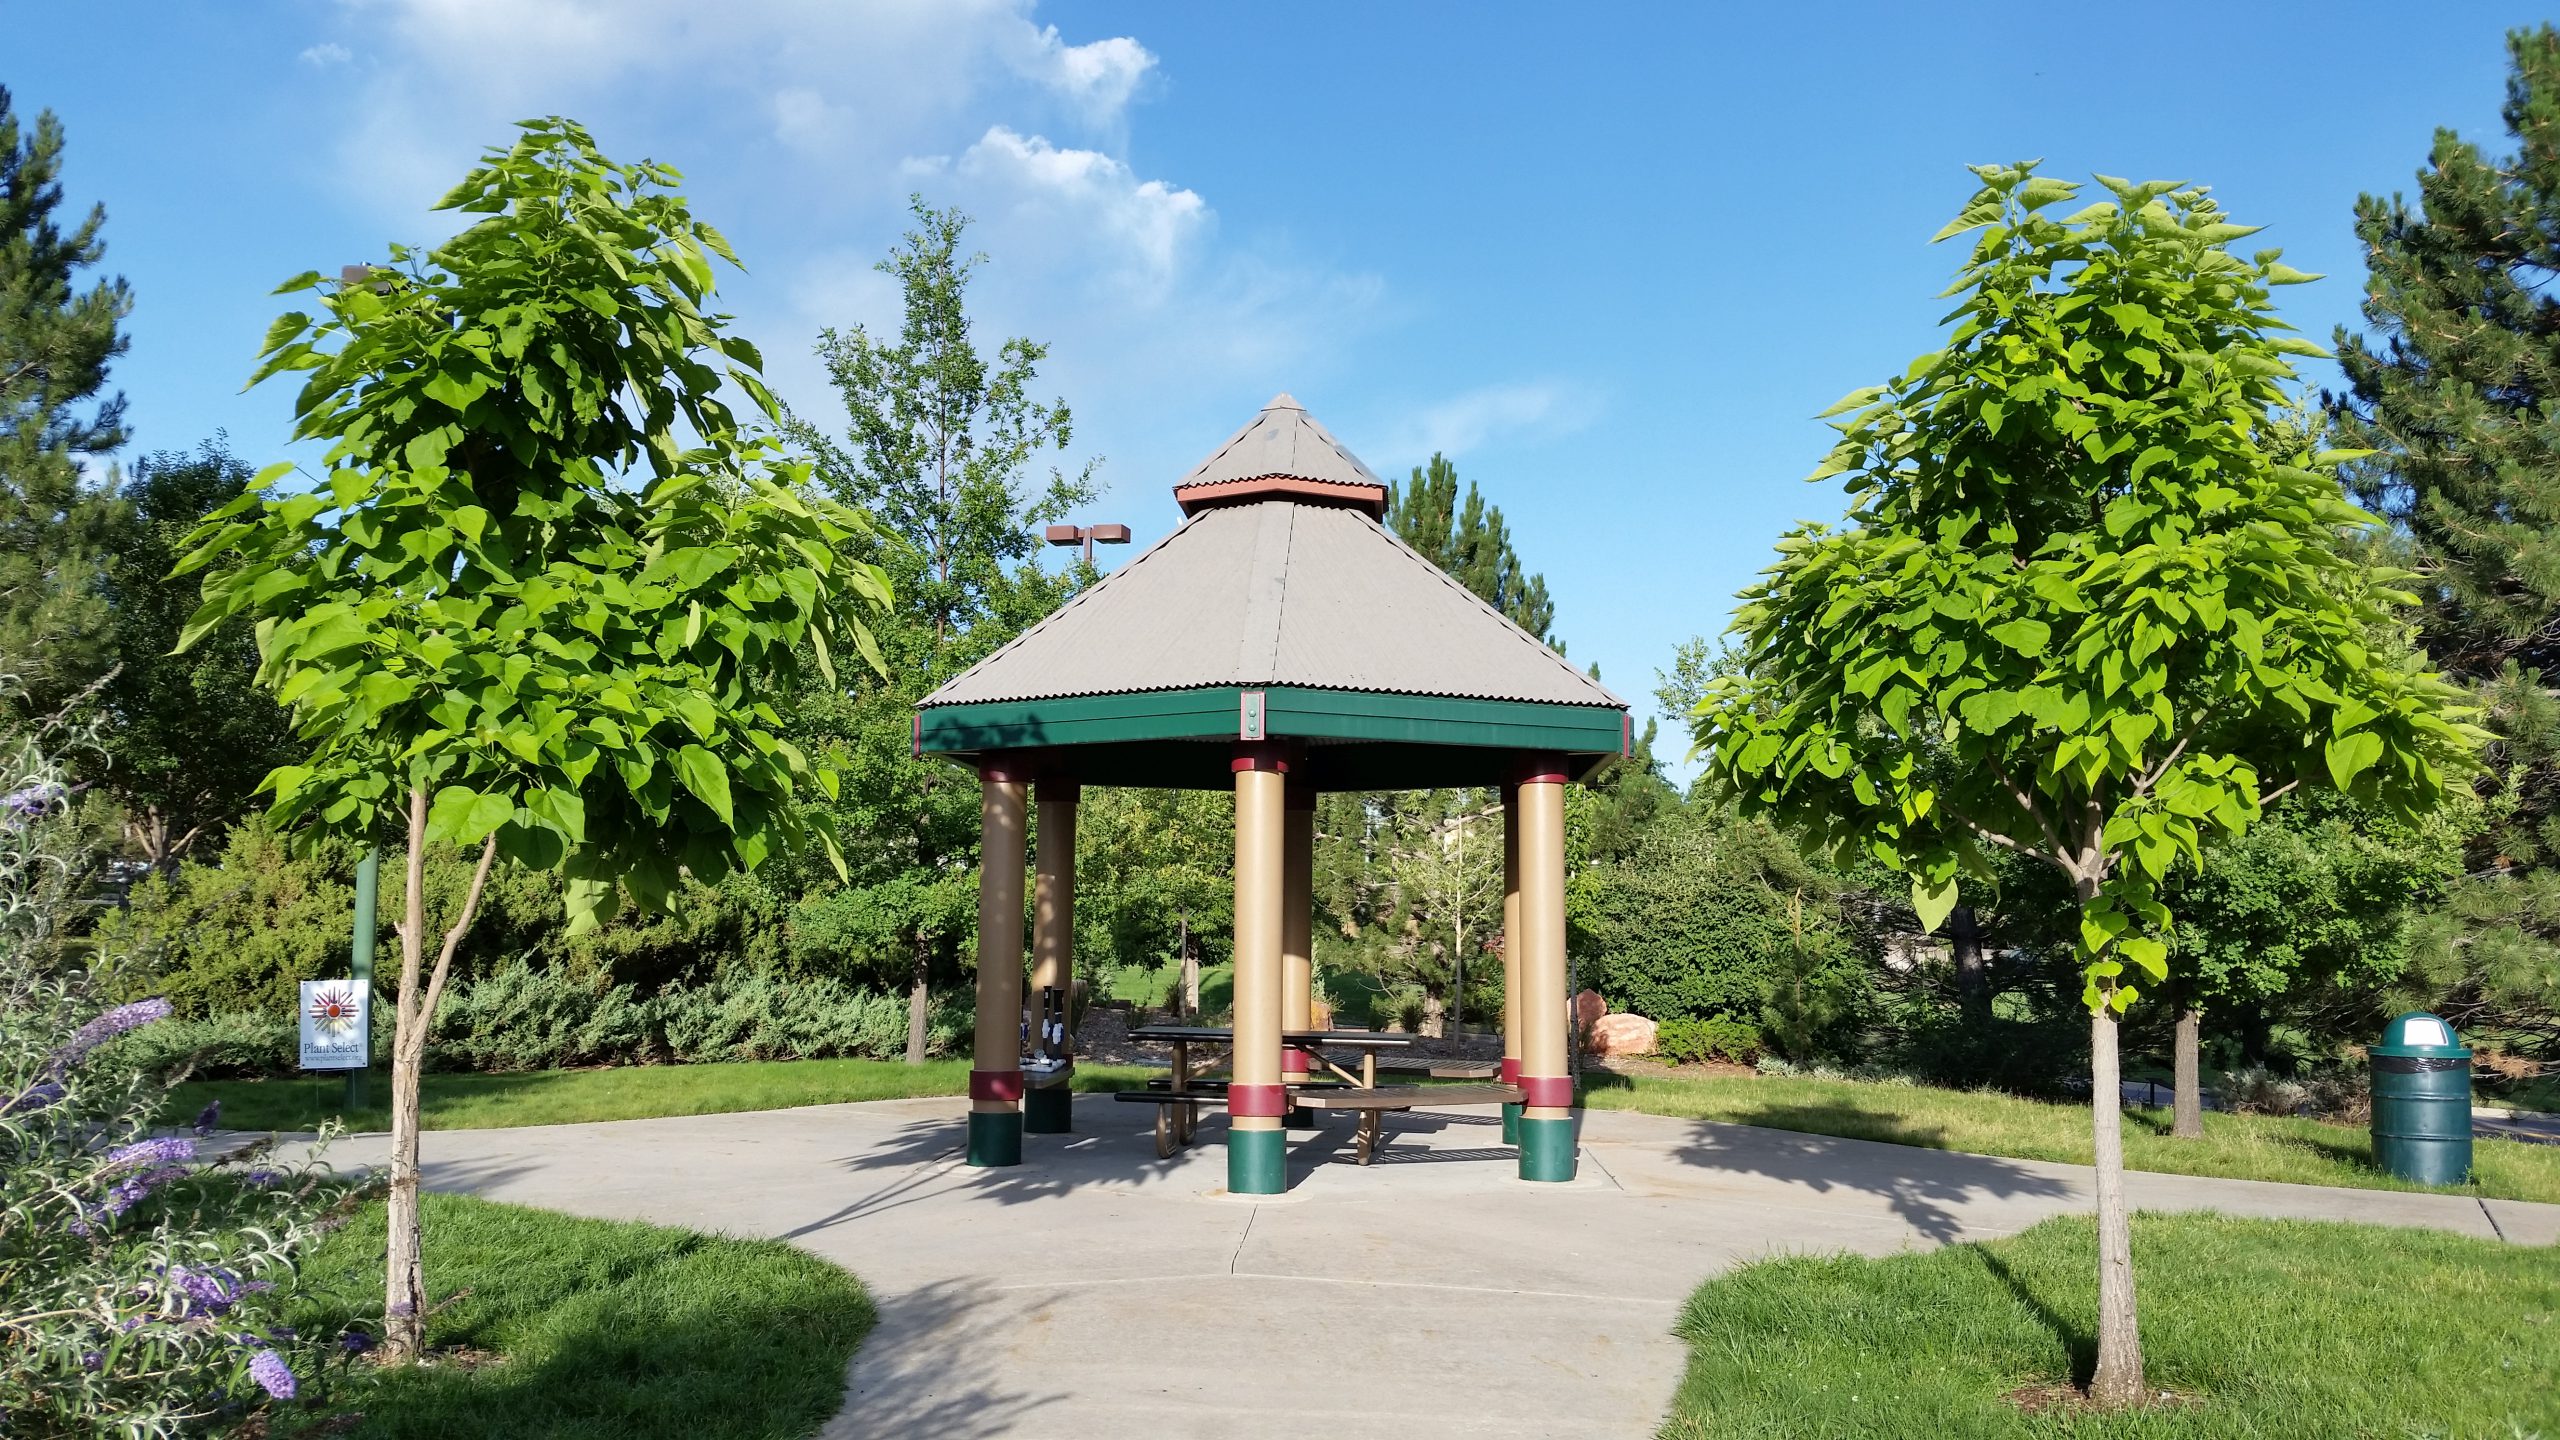 Grey, green and tan pavilion with picnic table underneath on a concrete path surrounded by green grass and green leafy trees. Margaret W. Carpenter Recreation Center Garden.